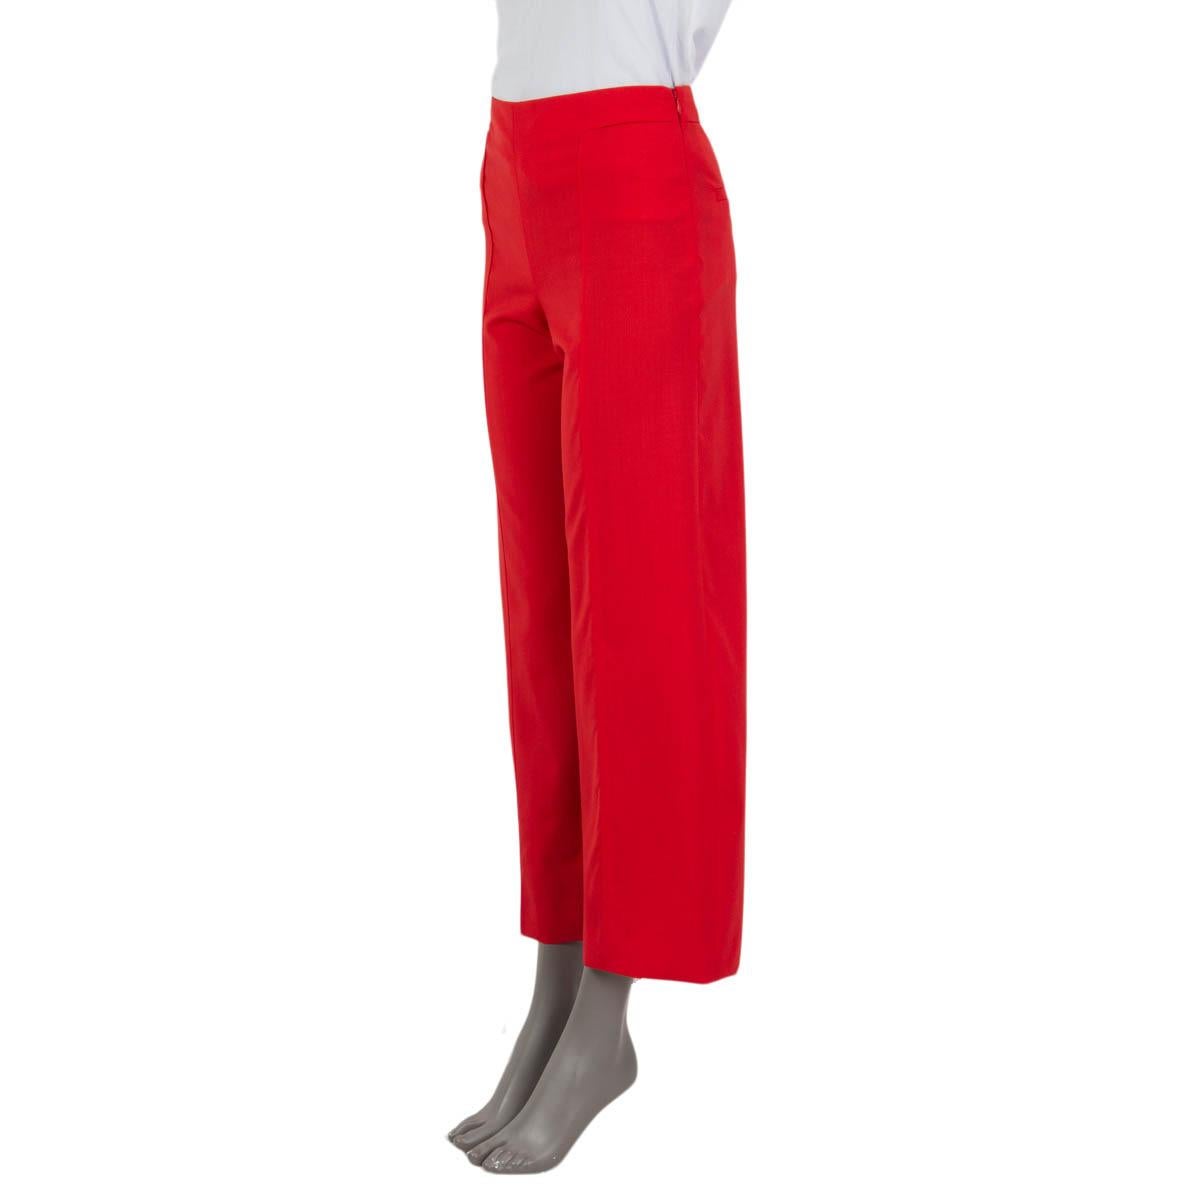 100% authentic Hermès wide leg suit pants in red virgin wool (100%). Feature two slit pockets on the front and two sewn shut slit pockets at the back. Open with a concealed zipper and a button on the side. Semi-lined in red viscose (88%) and